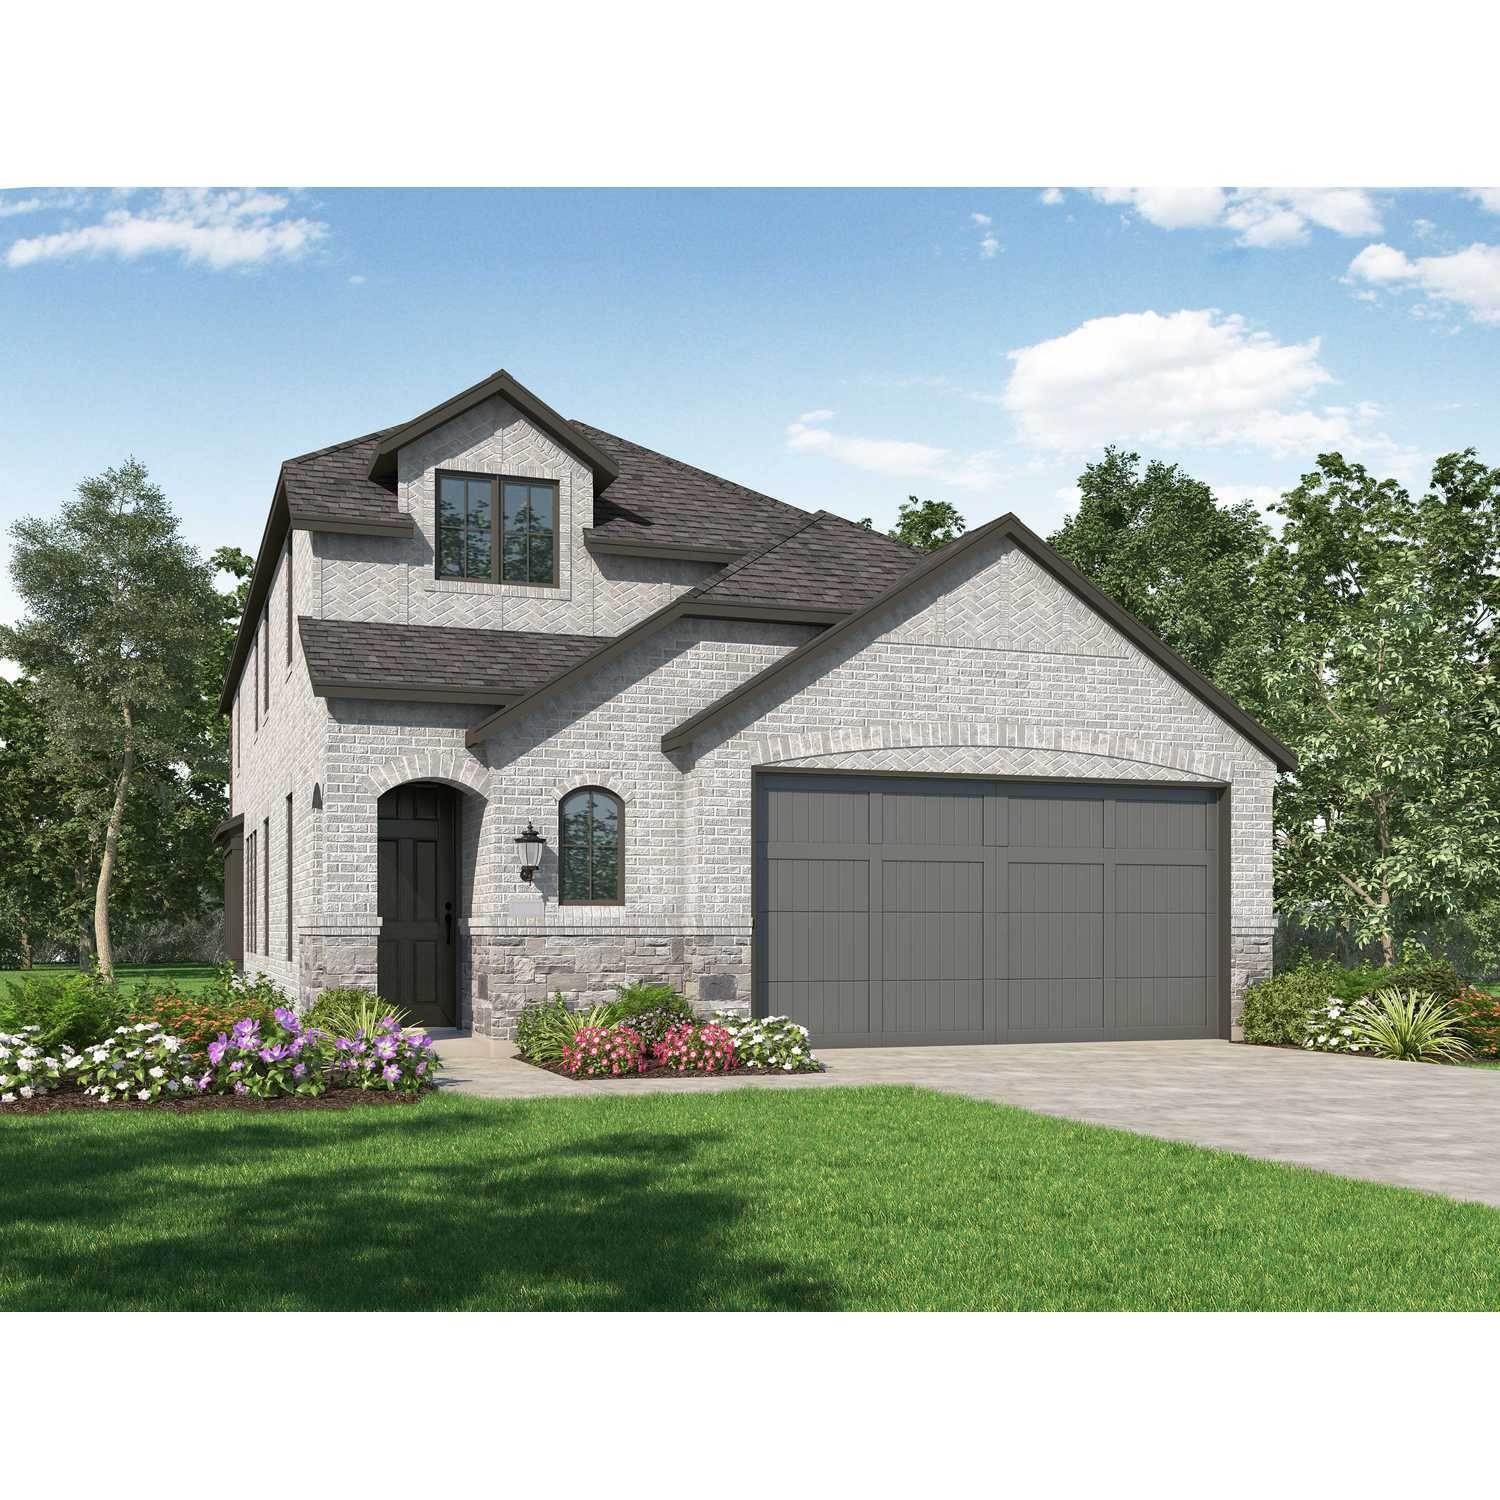 Single Family for Sale at Legacy At Lake Dunlap 280 Bodensee Place, New Braunfels, TX 78130